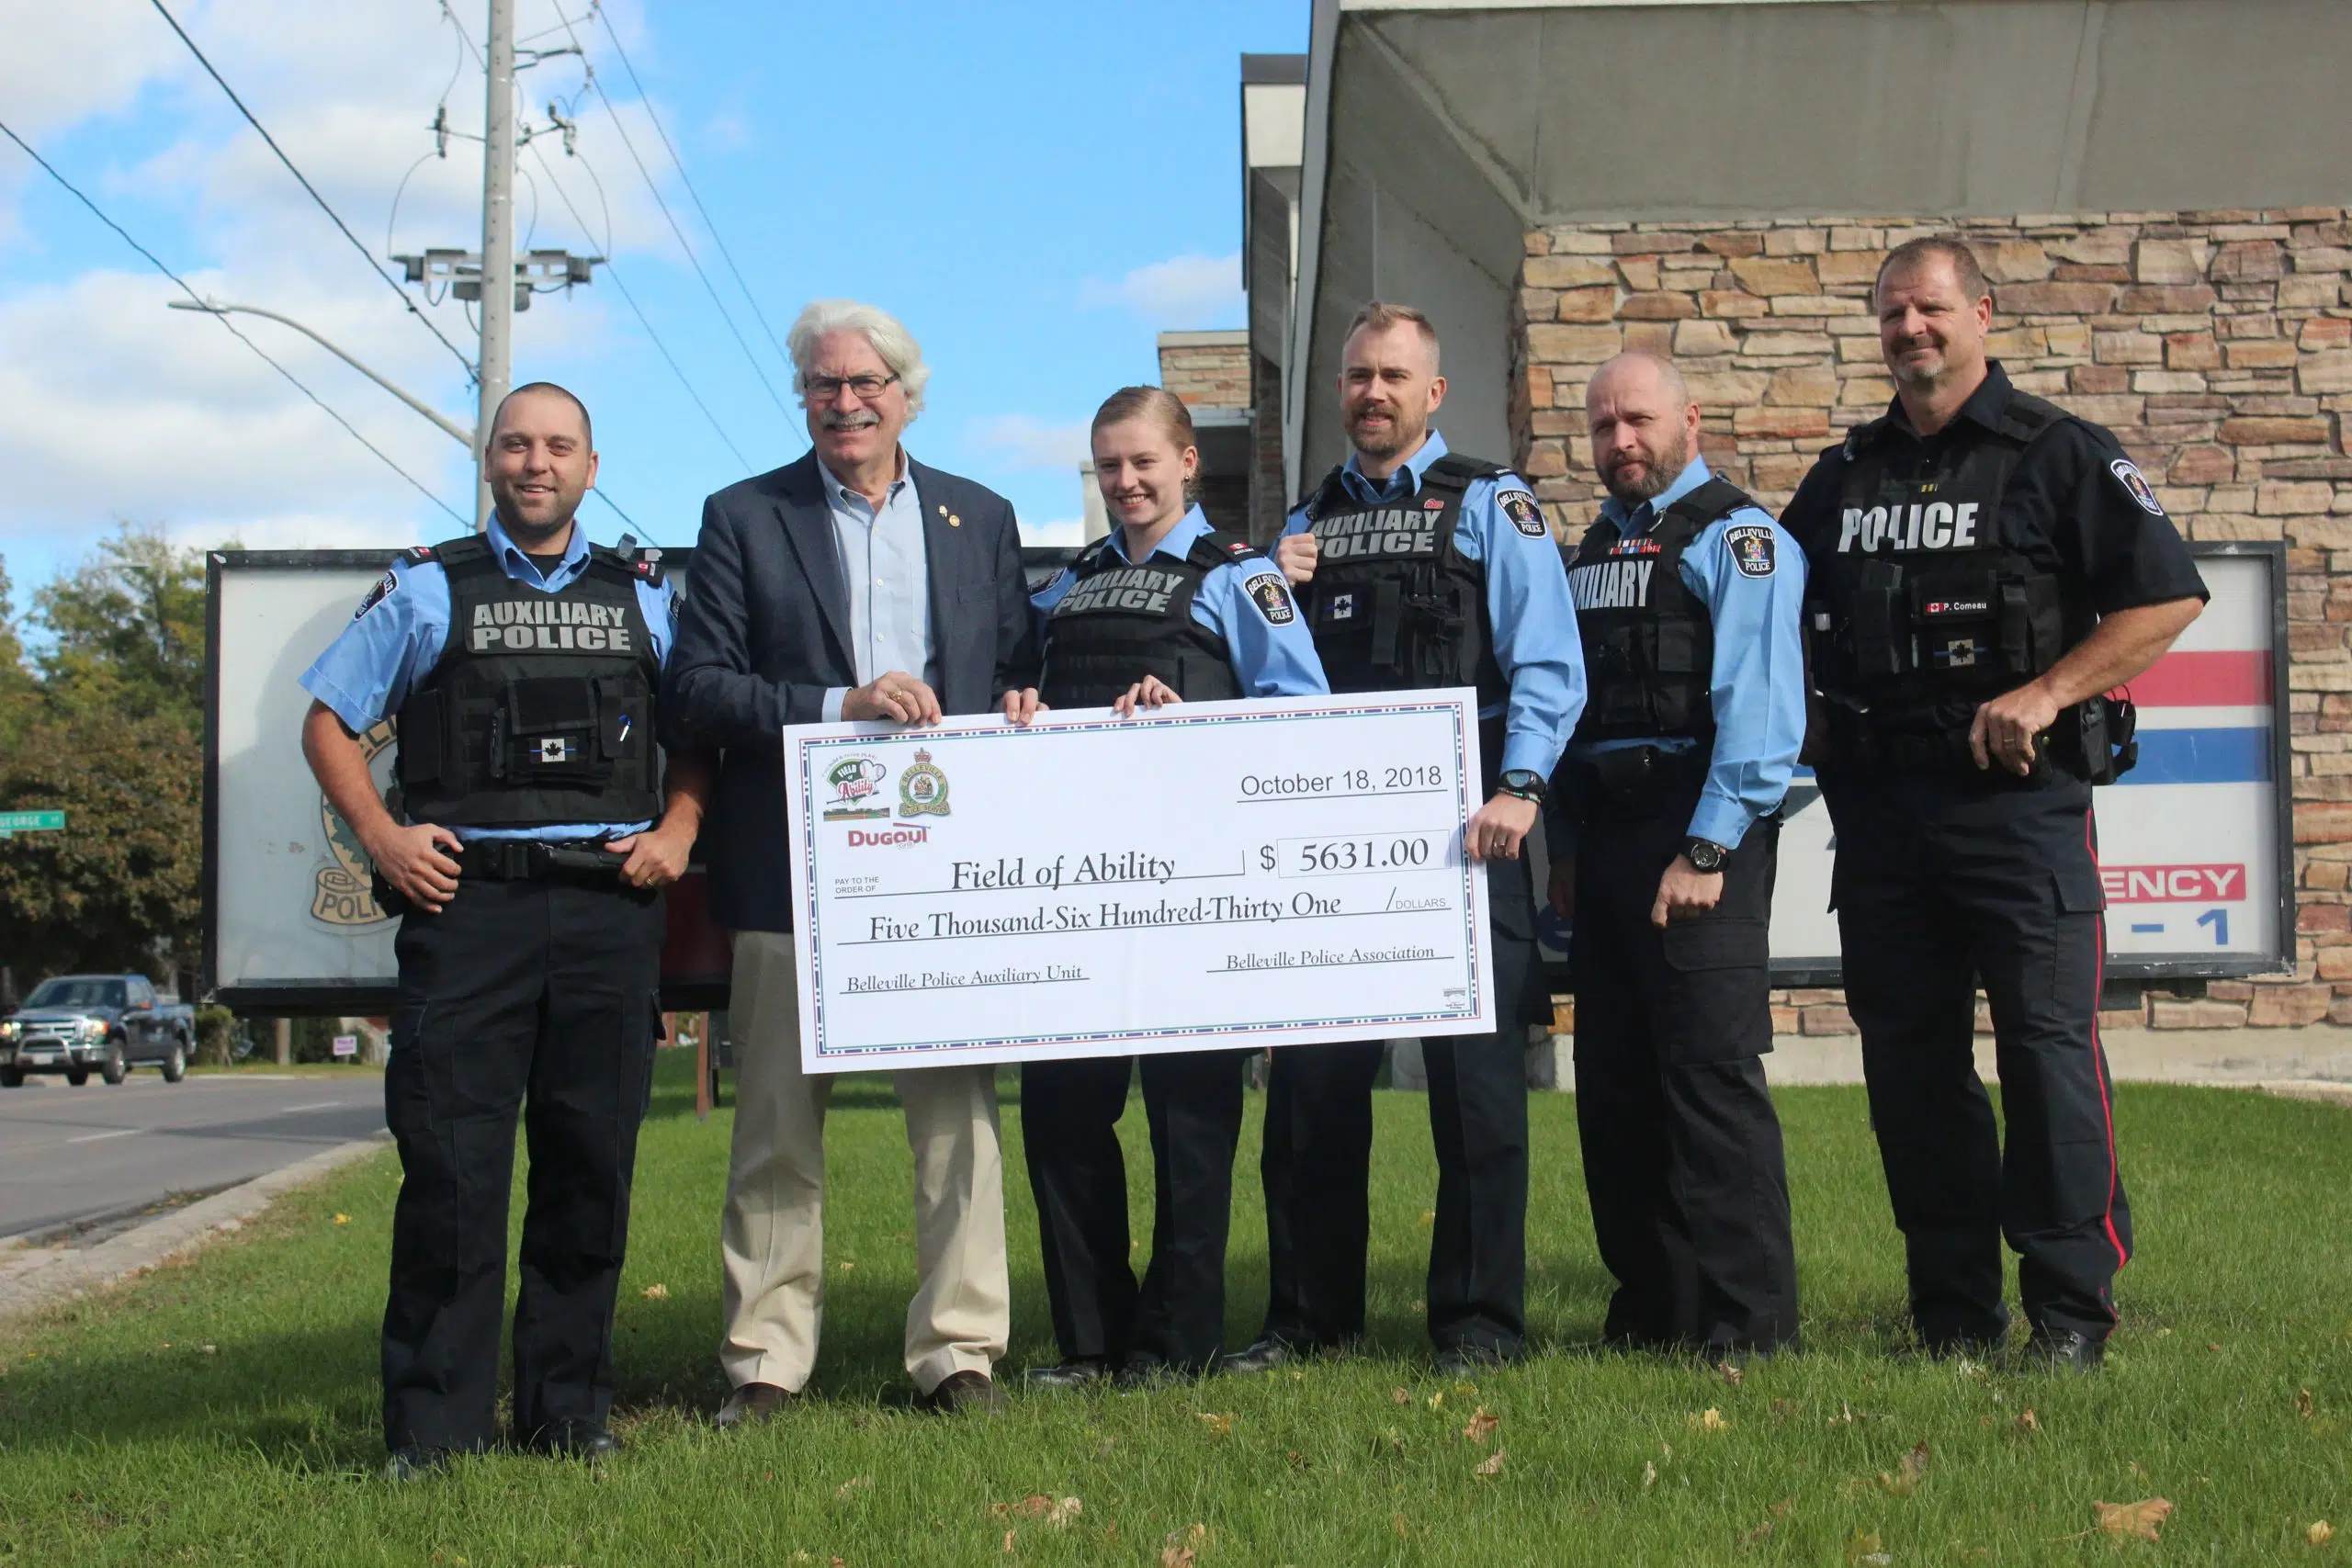 Challenger Baseball receives local police support